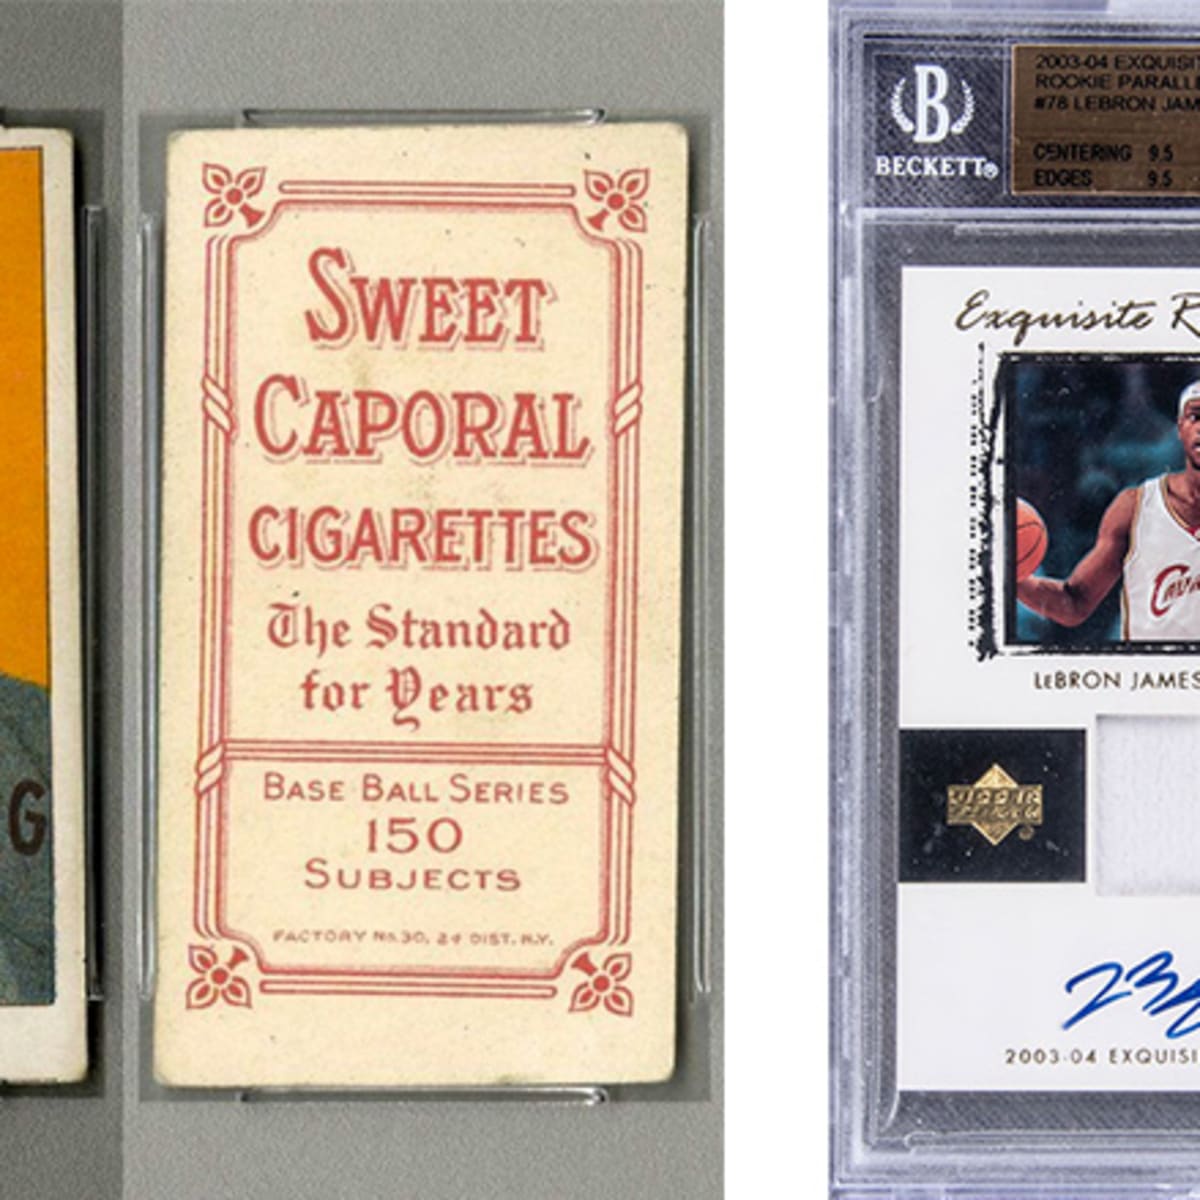 What are the most valuable sports cards? - Quora